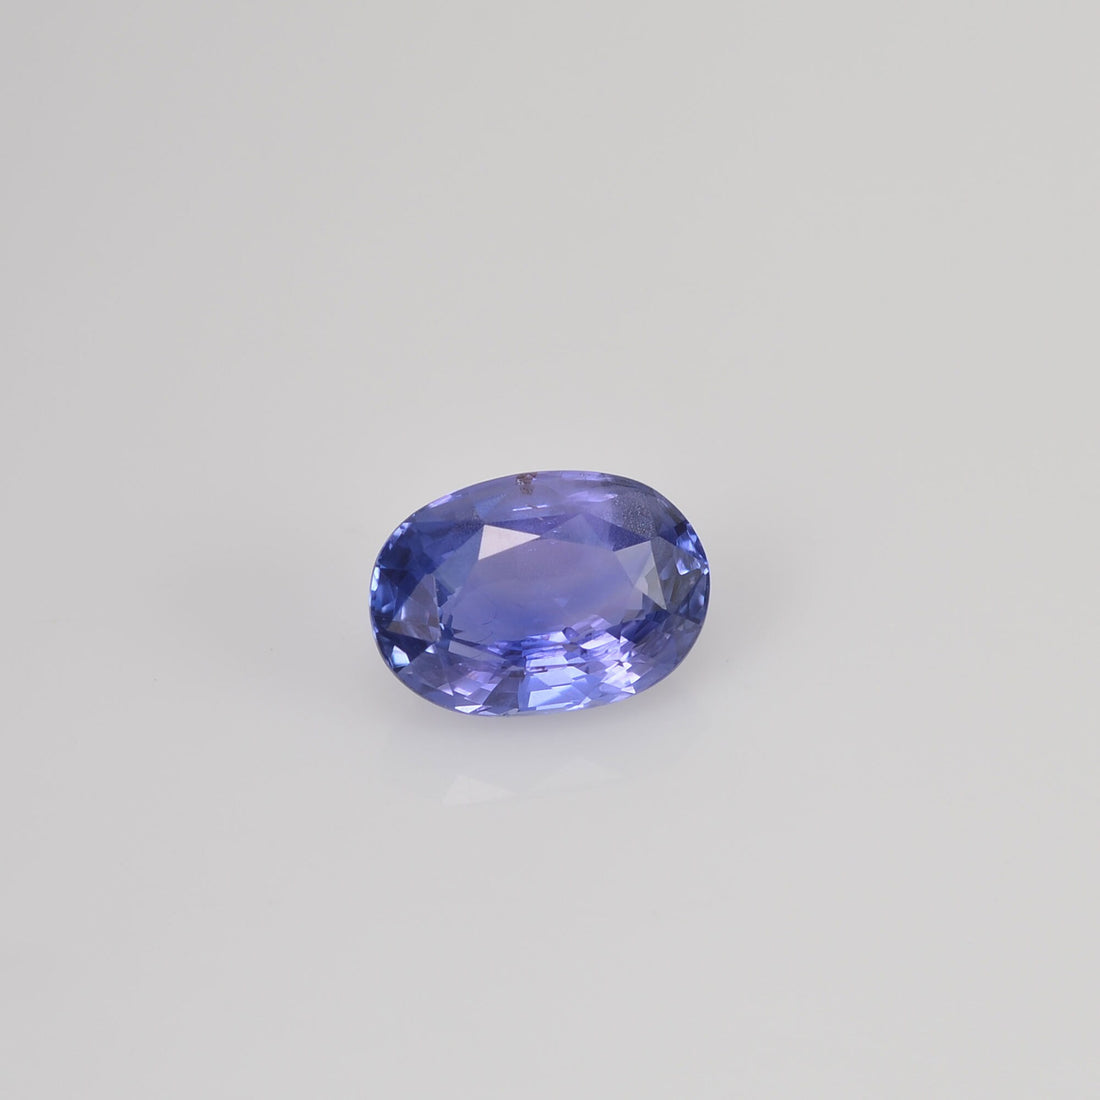 1.59 cts Unheated Natural Blue Sapphire Loose Gemstone Oval Cut Certified